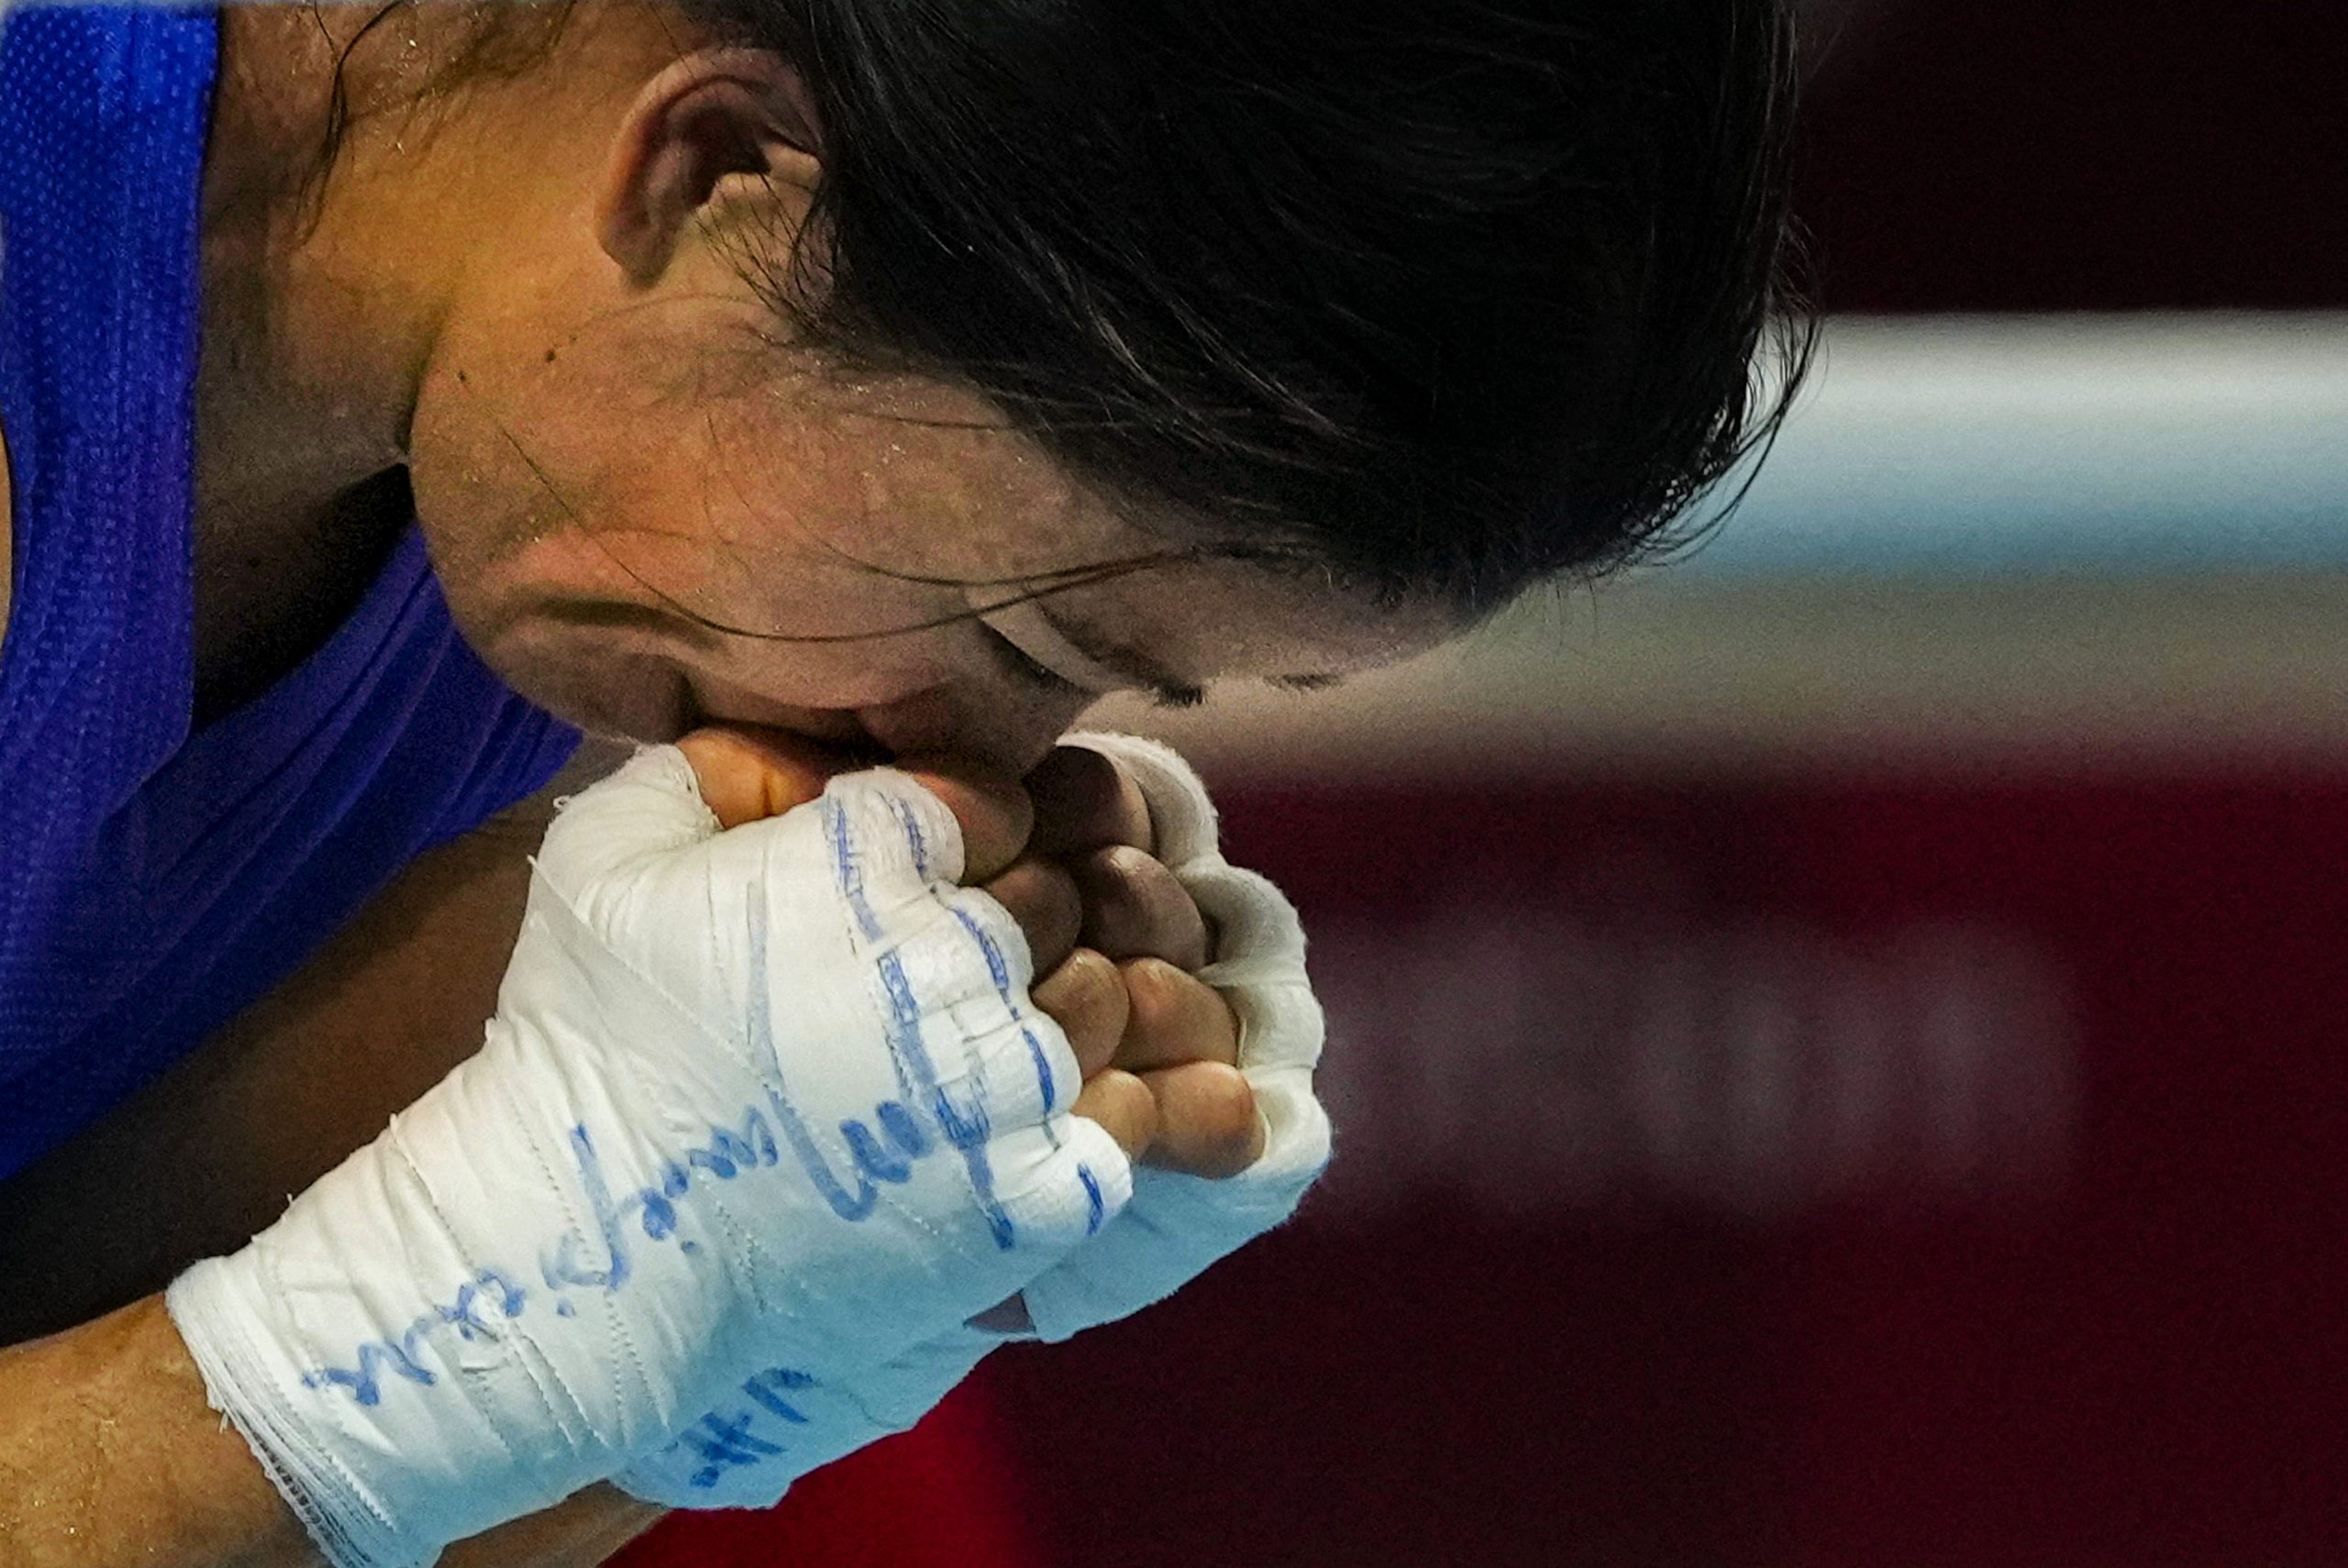 I can still play: Boxer Mary Kom on her comeback after Olympics loss. Watch